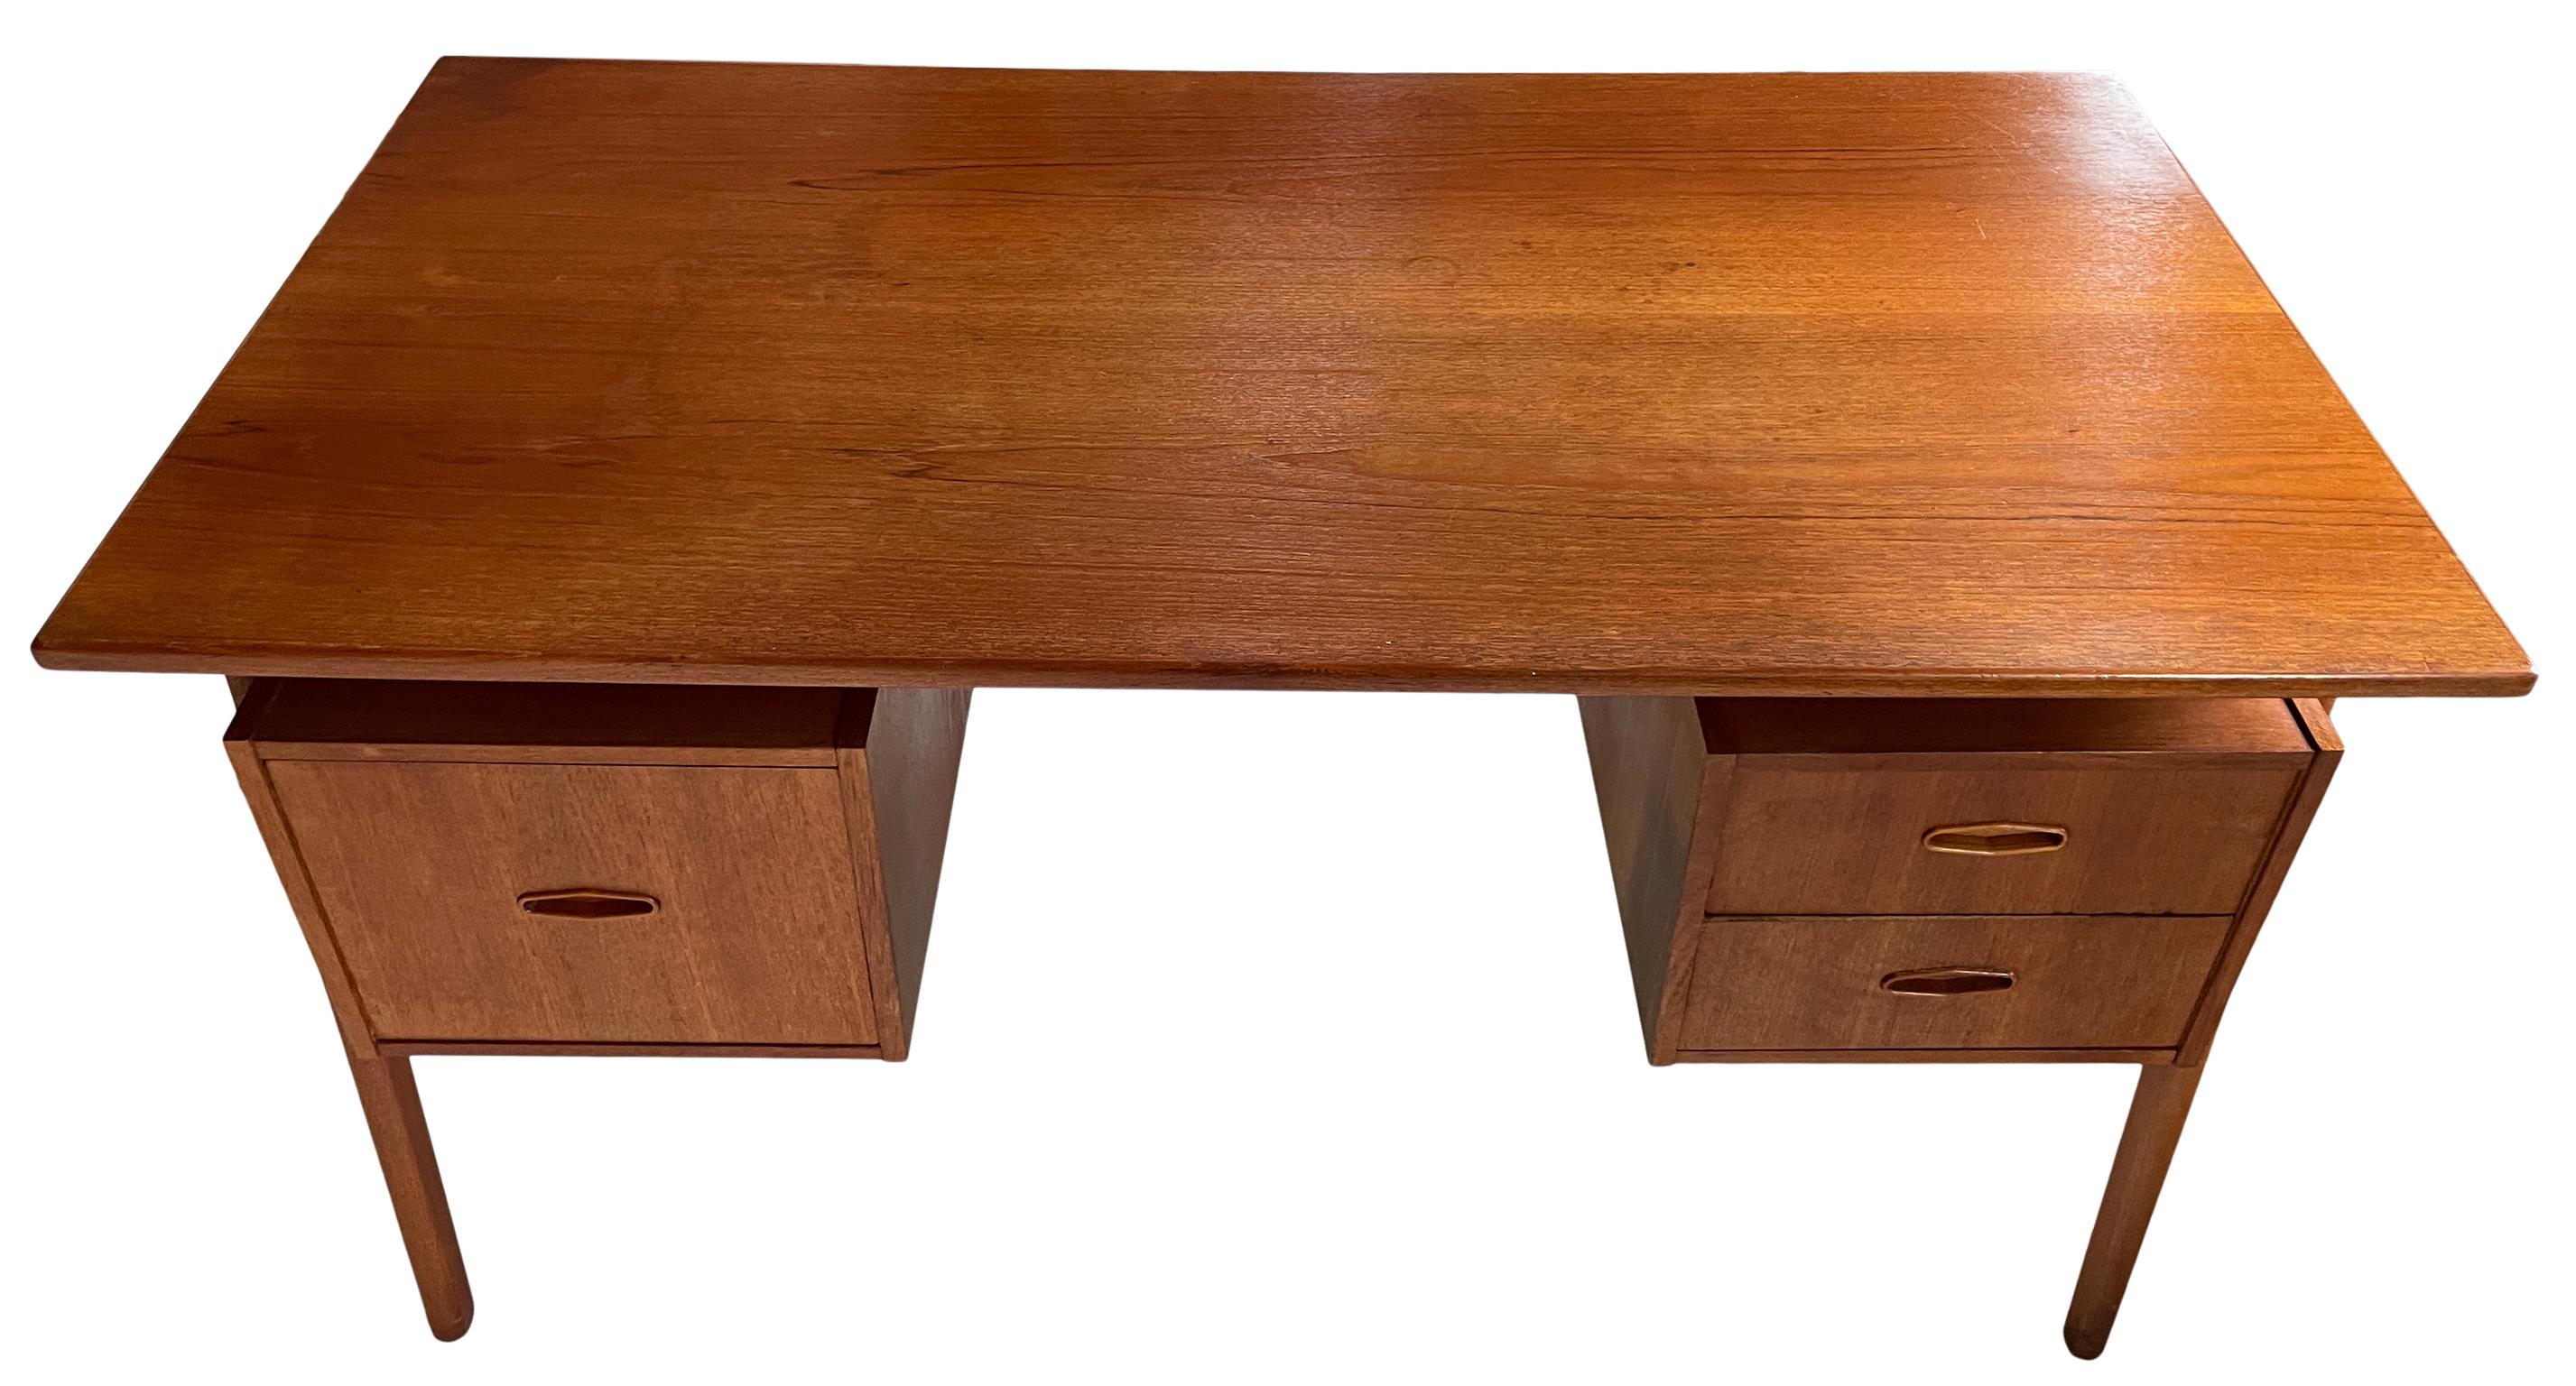 Great Danish modern mid century desk with 3 drawers with carved pulls. Danish design. No labels, made in Denmark. Kneehole cabinet has original Key - Lockable. All drawers slide smooth great design. Front side of desk has storage areas. Located in